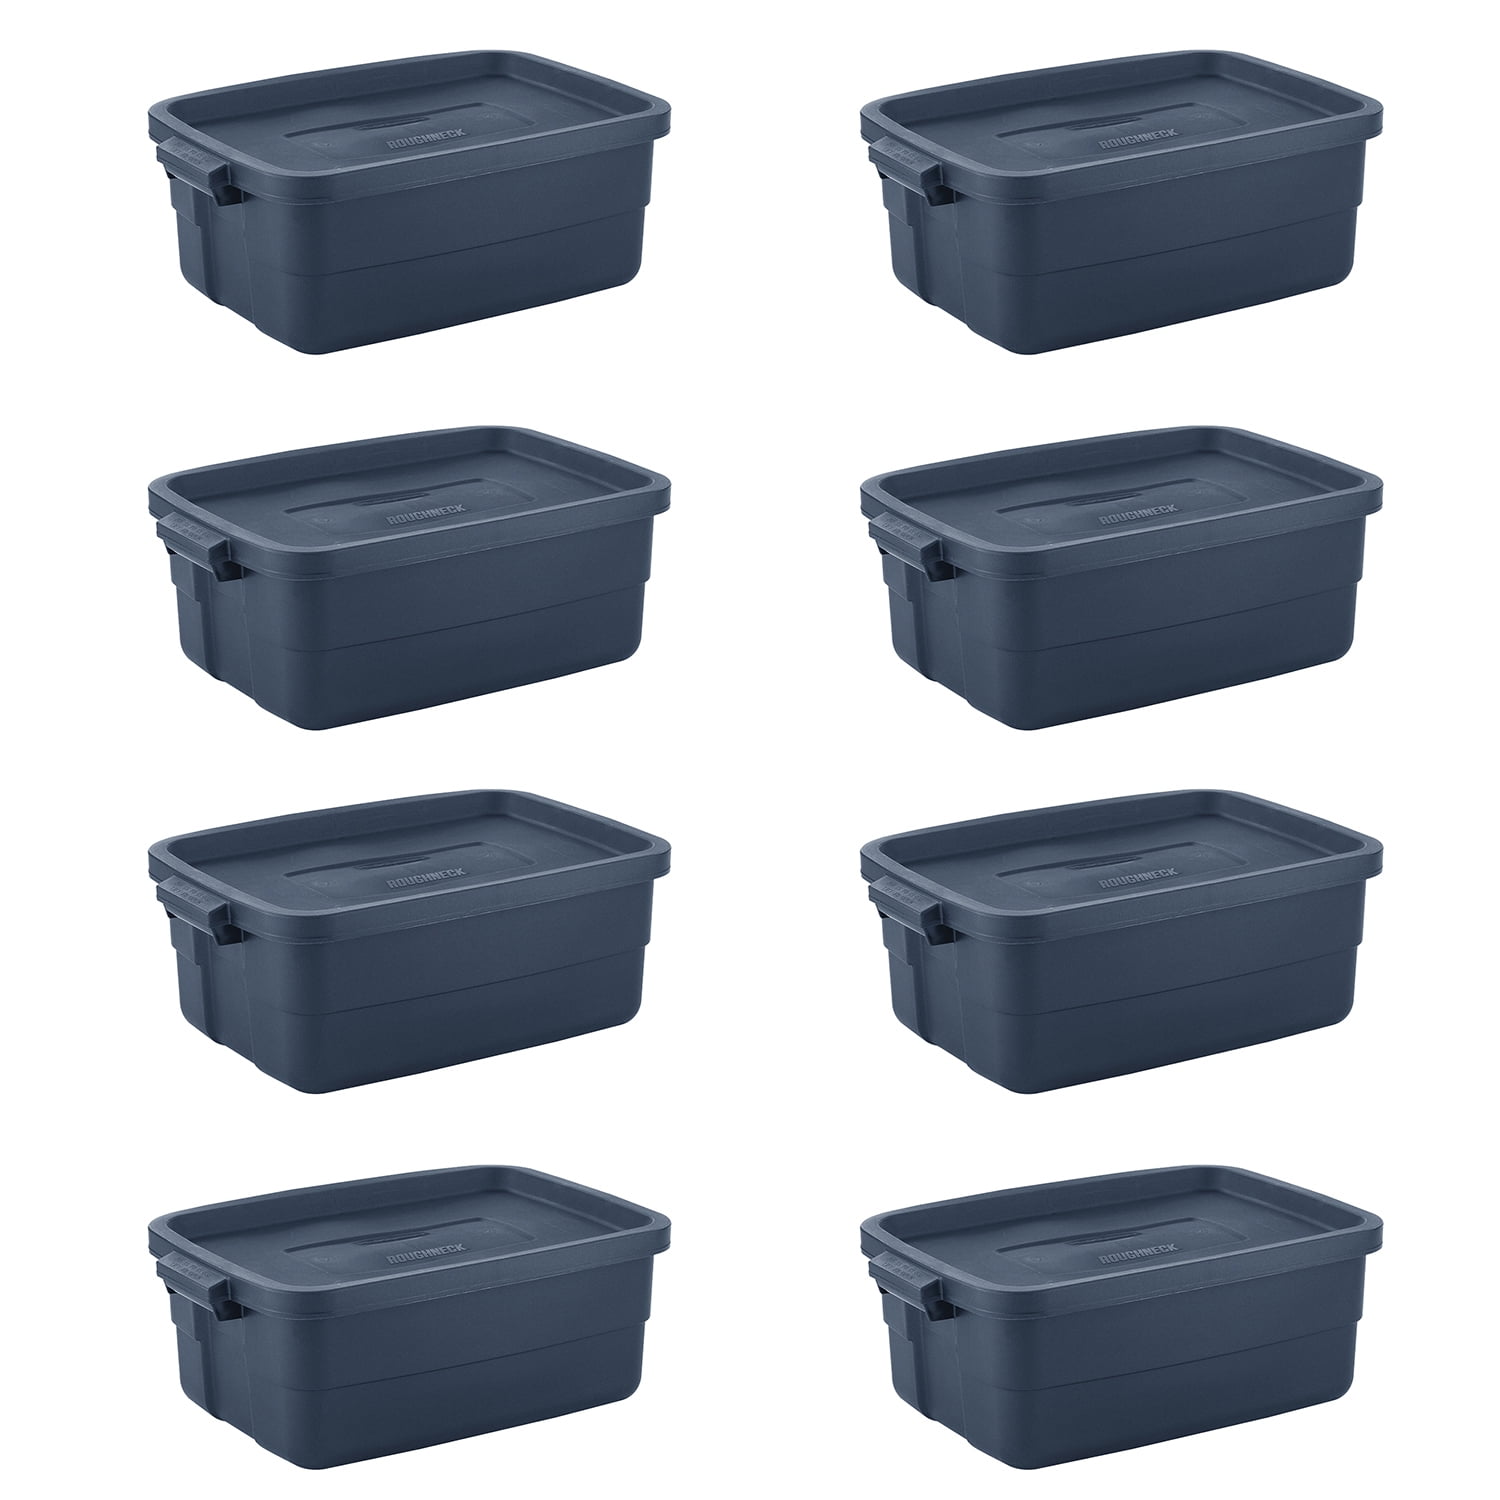 Rubbermaid Roughneck 3 Gallon Rugged Plastic Reusable Stackable Home  Storage Totes with Lids, Dark Indigo Metallic (12 Pack)